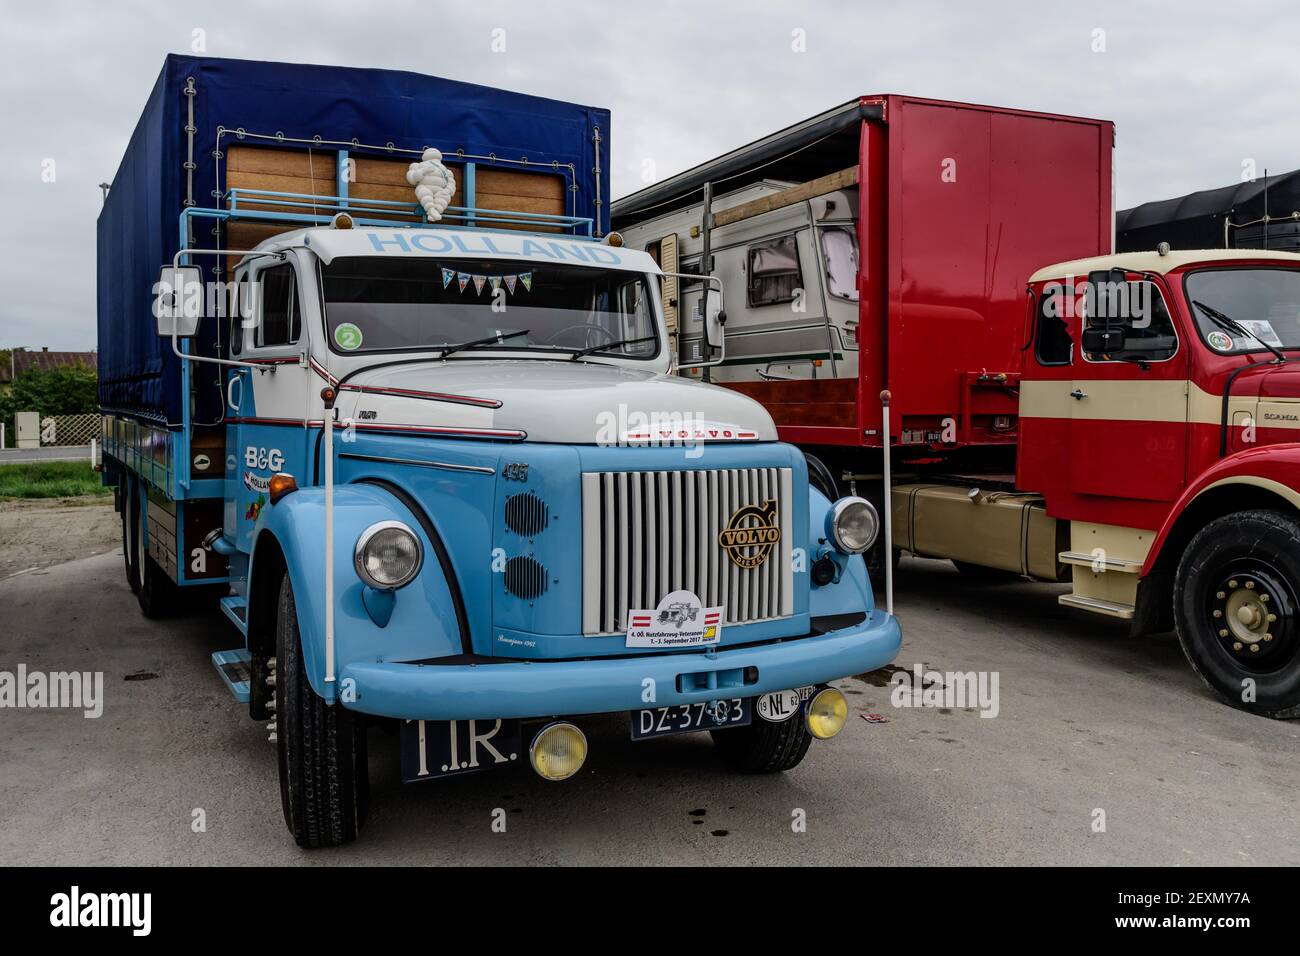 st.valentin, austria, 01 sep 2017, volvo truck at an oldtimer truck meeting, meeting for vintage trucks and tractors Stock Photo